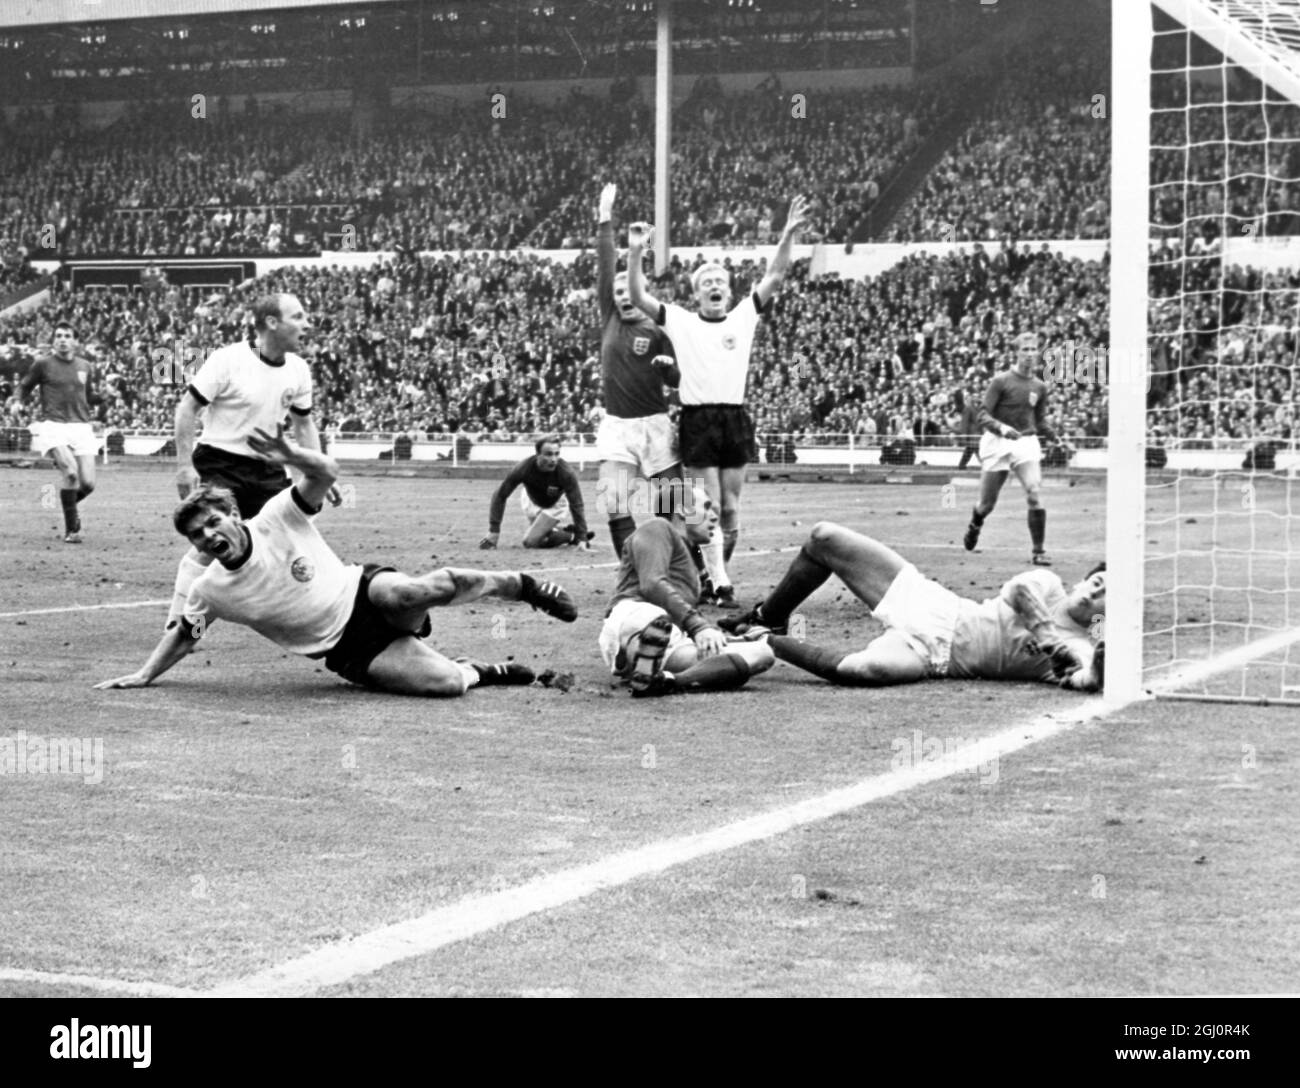 The goal that shook WembleyWembley, England : Yells from West German players Wolfgang Weber (white shirt, on ground) who scored, Uwe Seeler (white shirt, left) and Karl-Heinz Schnellinger (white shirt, centre) after they had equalised in the last few seconds of play in the World Cup Final at Wembley Stadium today. In extra time, England added two more goals to give the victory. England players in the picture are Ramon Wilson, (dark shirt on ground); Goalkeeper Gordon Banks; Captain Bobby Moore (behind Schnellinger); Jackie Charlton (background right); and George Cohen (background, centre). 30 Stock Photo